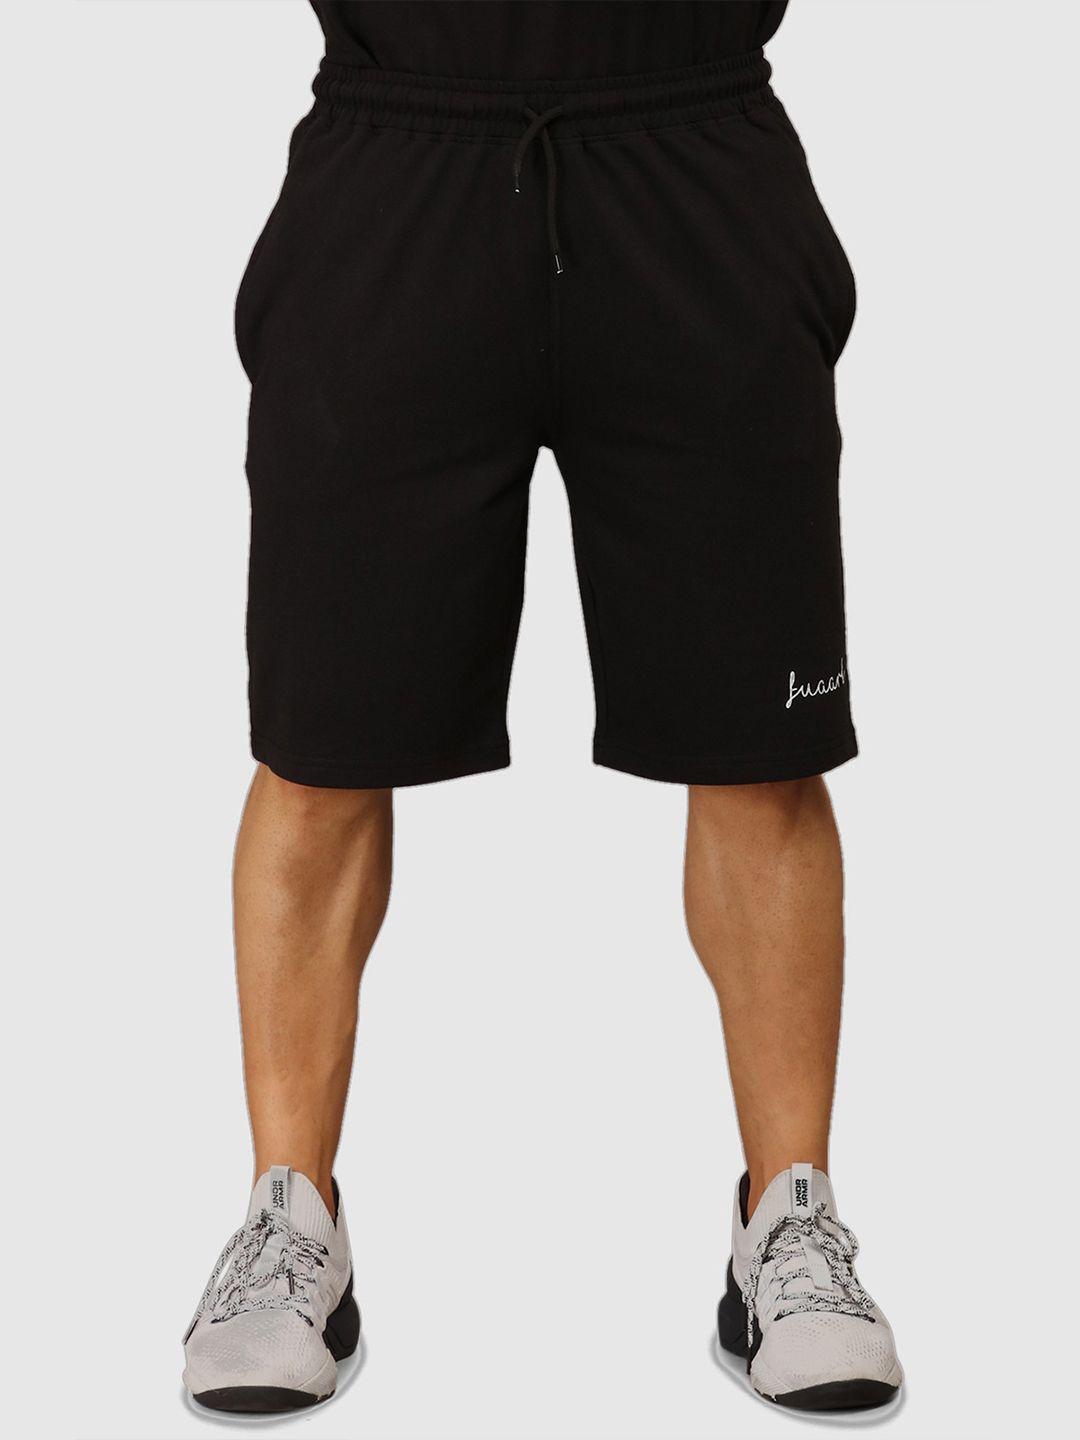 fuaark men black loose fit training or gym sports shorts